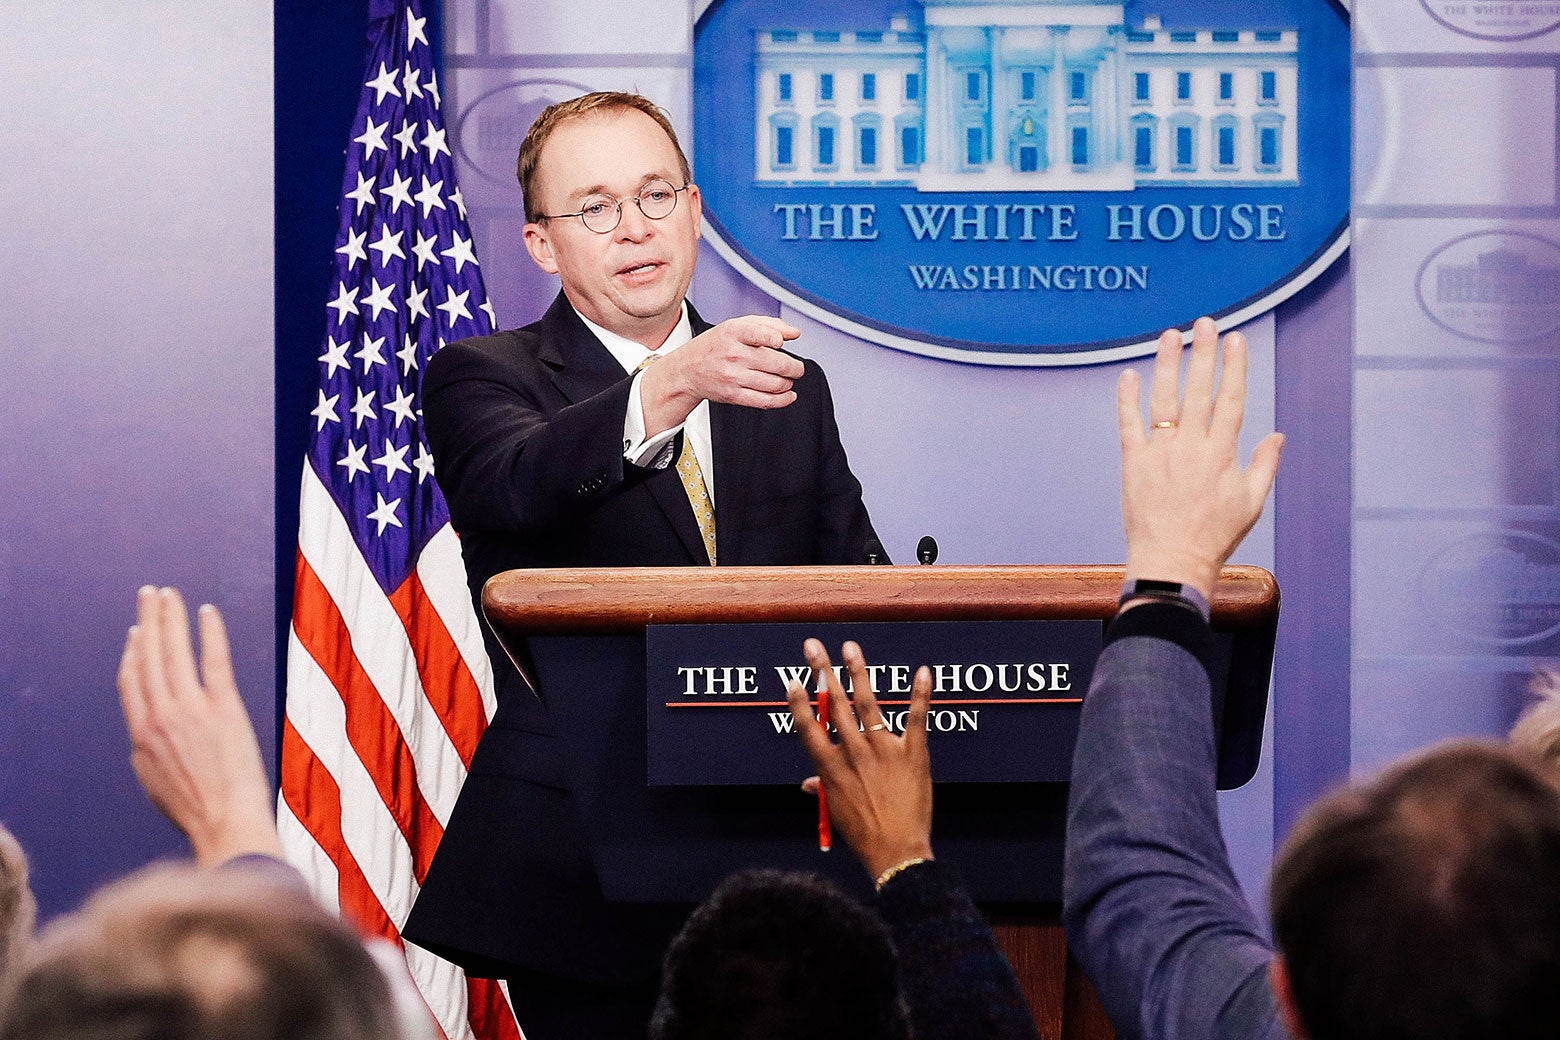 Office of Management and Budget Director Mick Mulvaney talks to reporters during a news conference about the ongoing partial shutdown of the federal government at the White House on Jan. 20 in Washington.